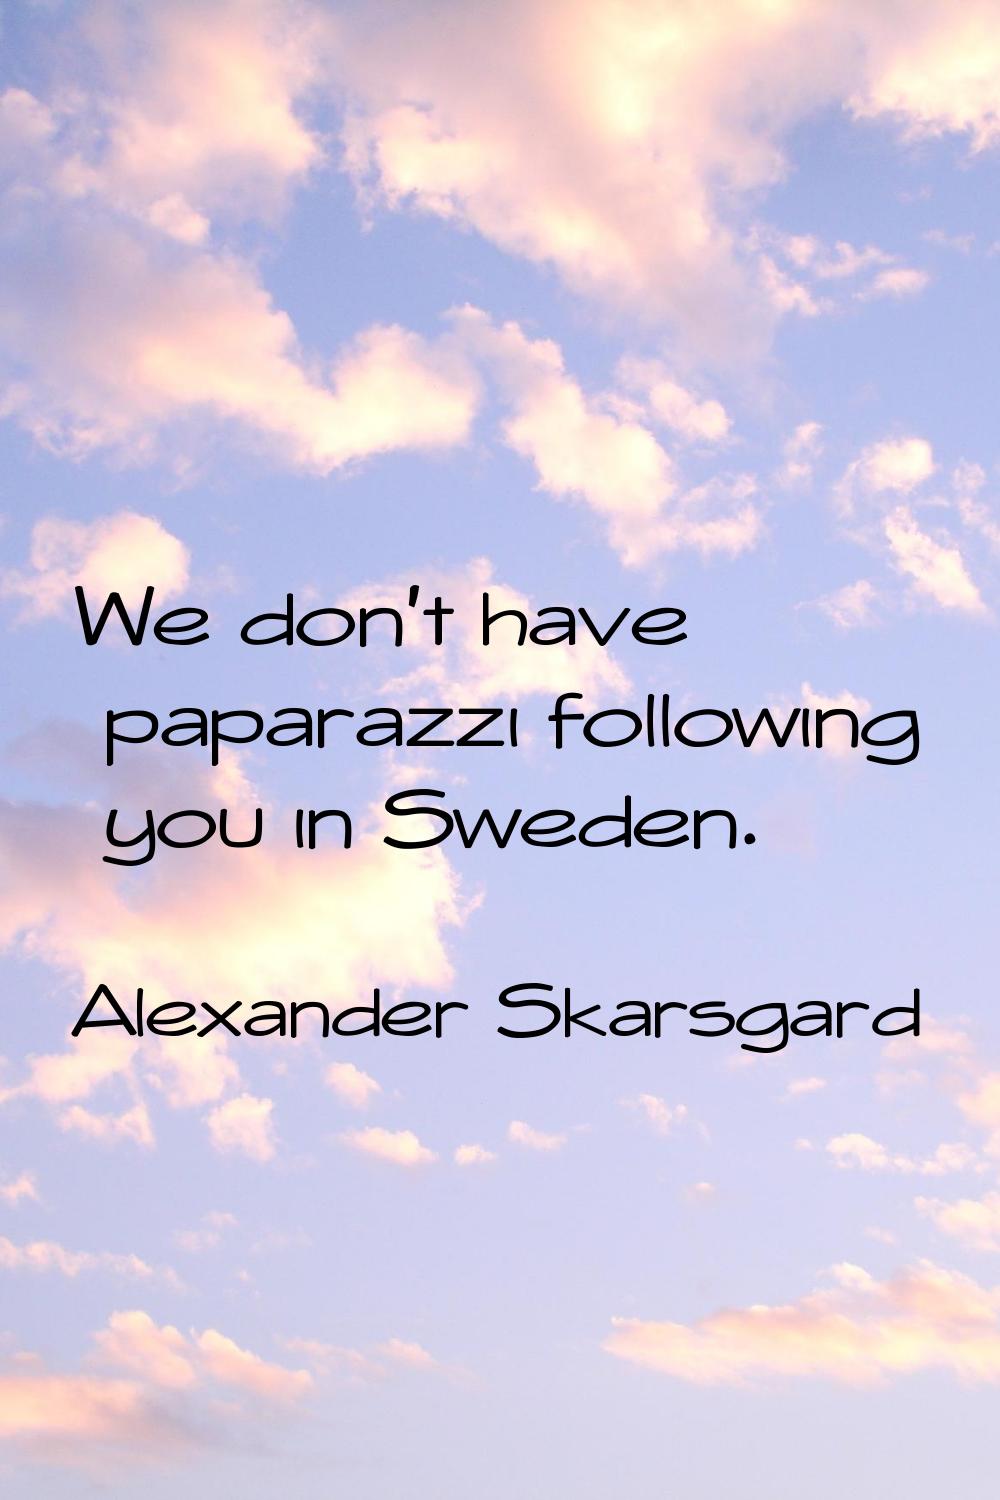 We don't have paparazzi following you in Sweden.